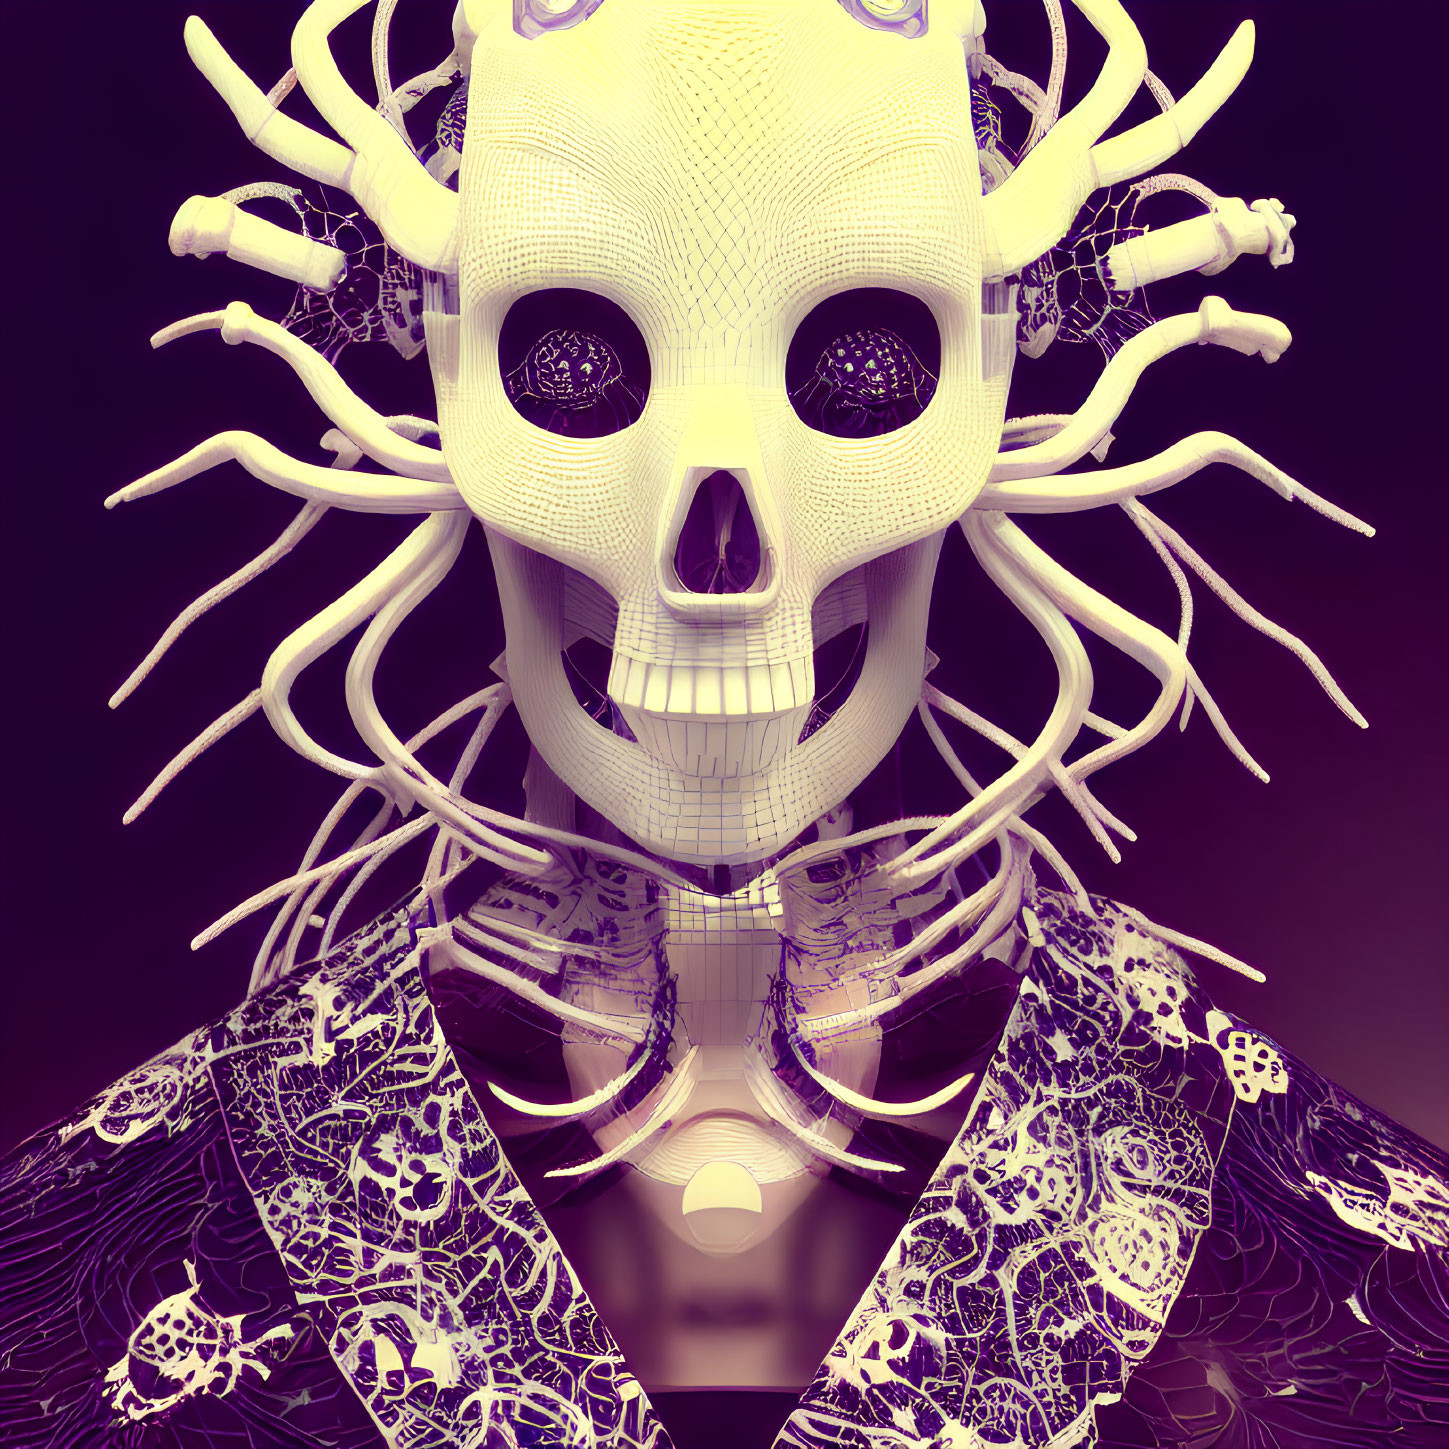 Stylized 3D render of human figure with skull head and intricate patterns